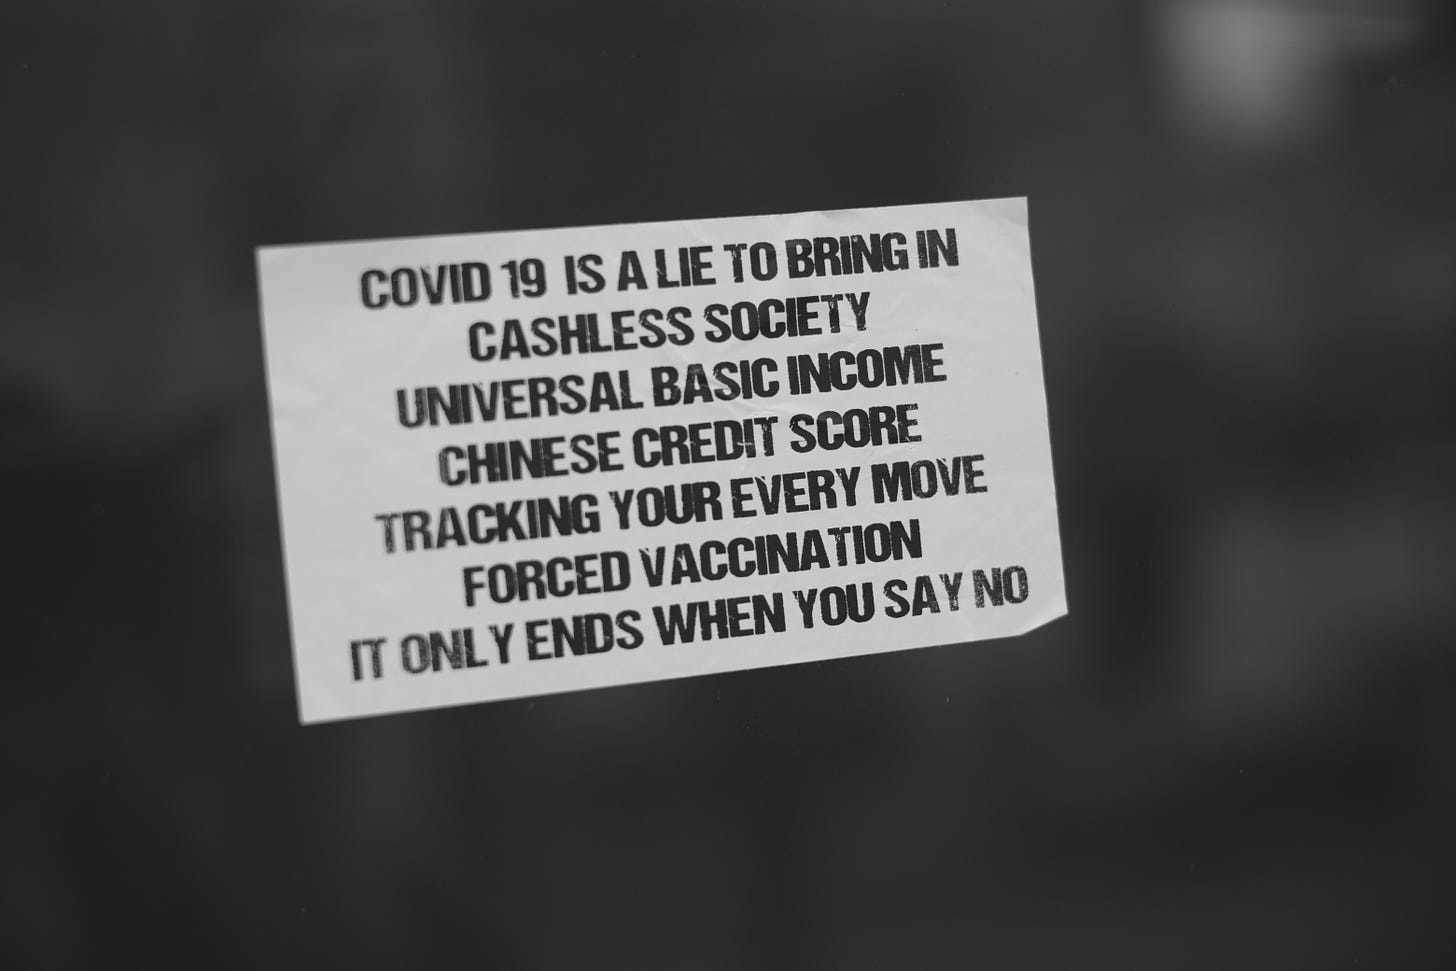 COVID is a lie to bring in cashless society